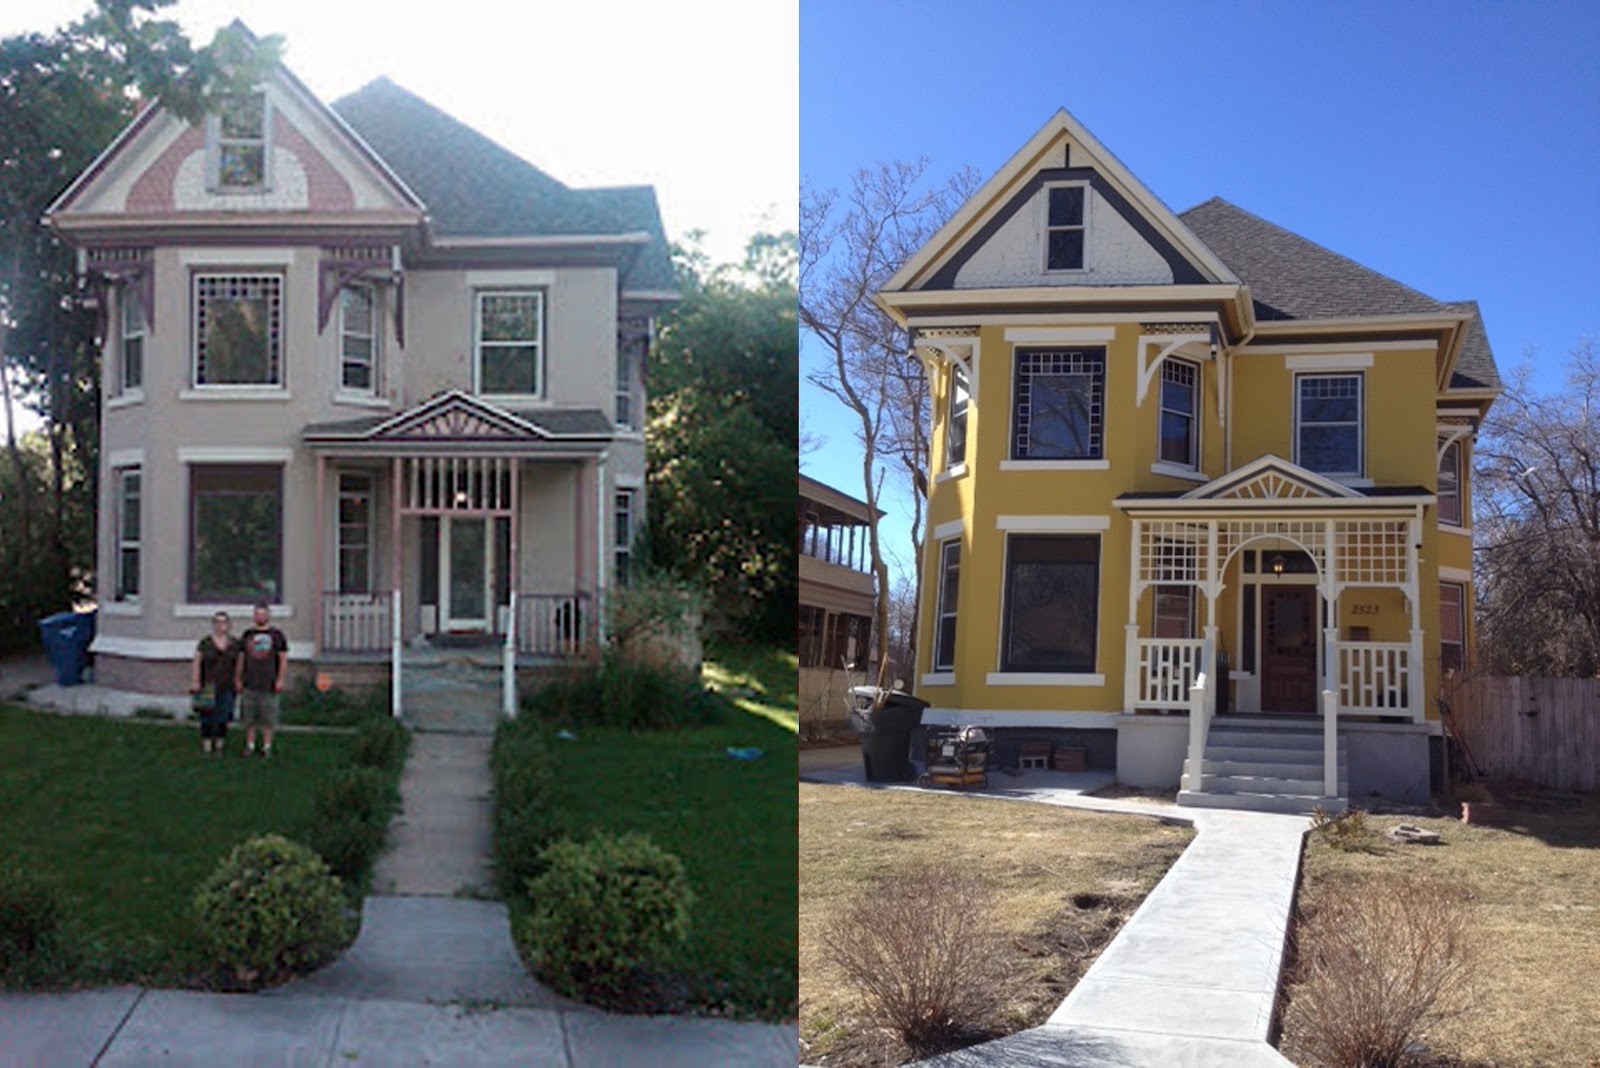 Eclectic Victorian Before and After Photos!